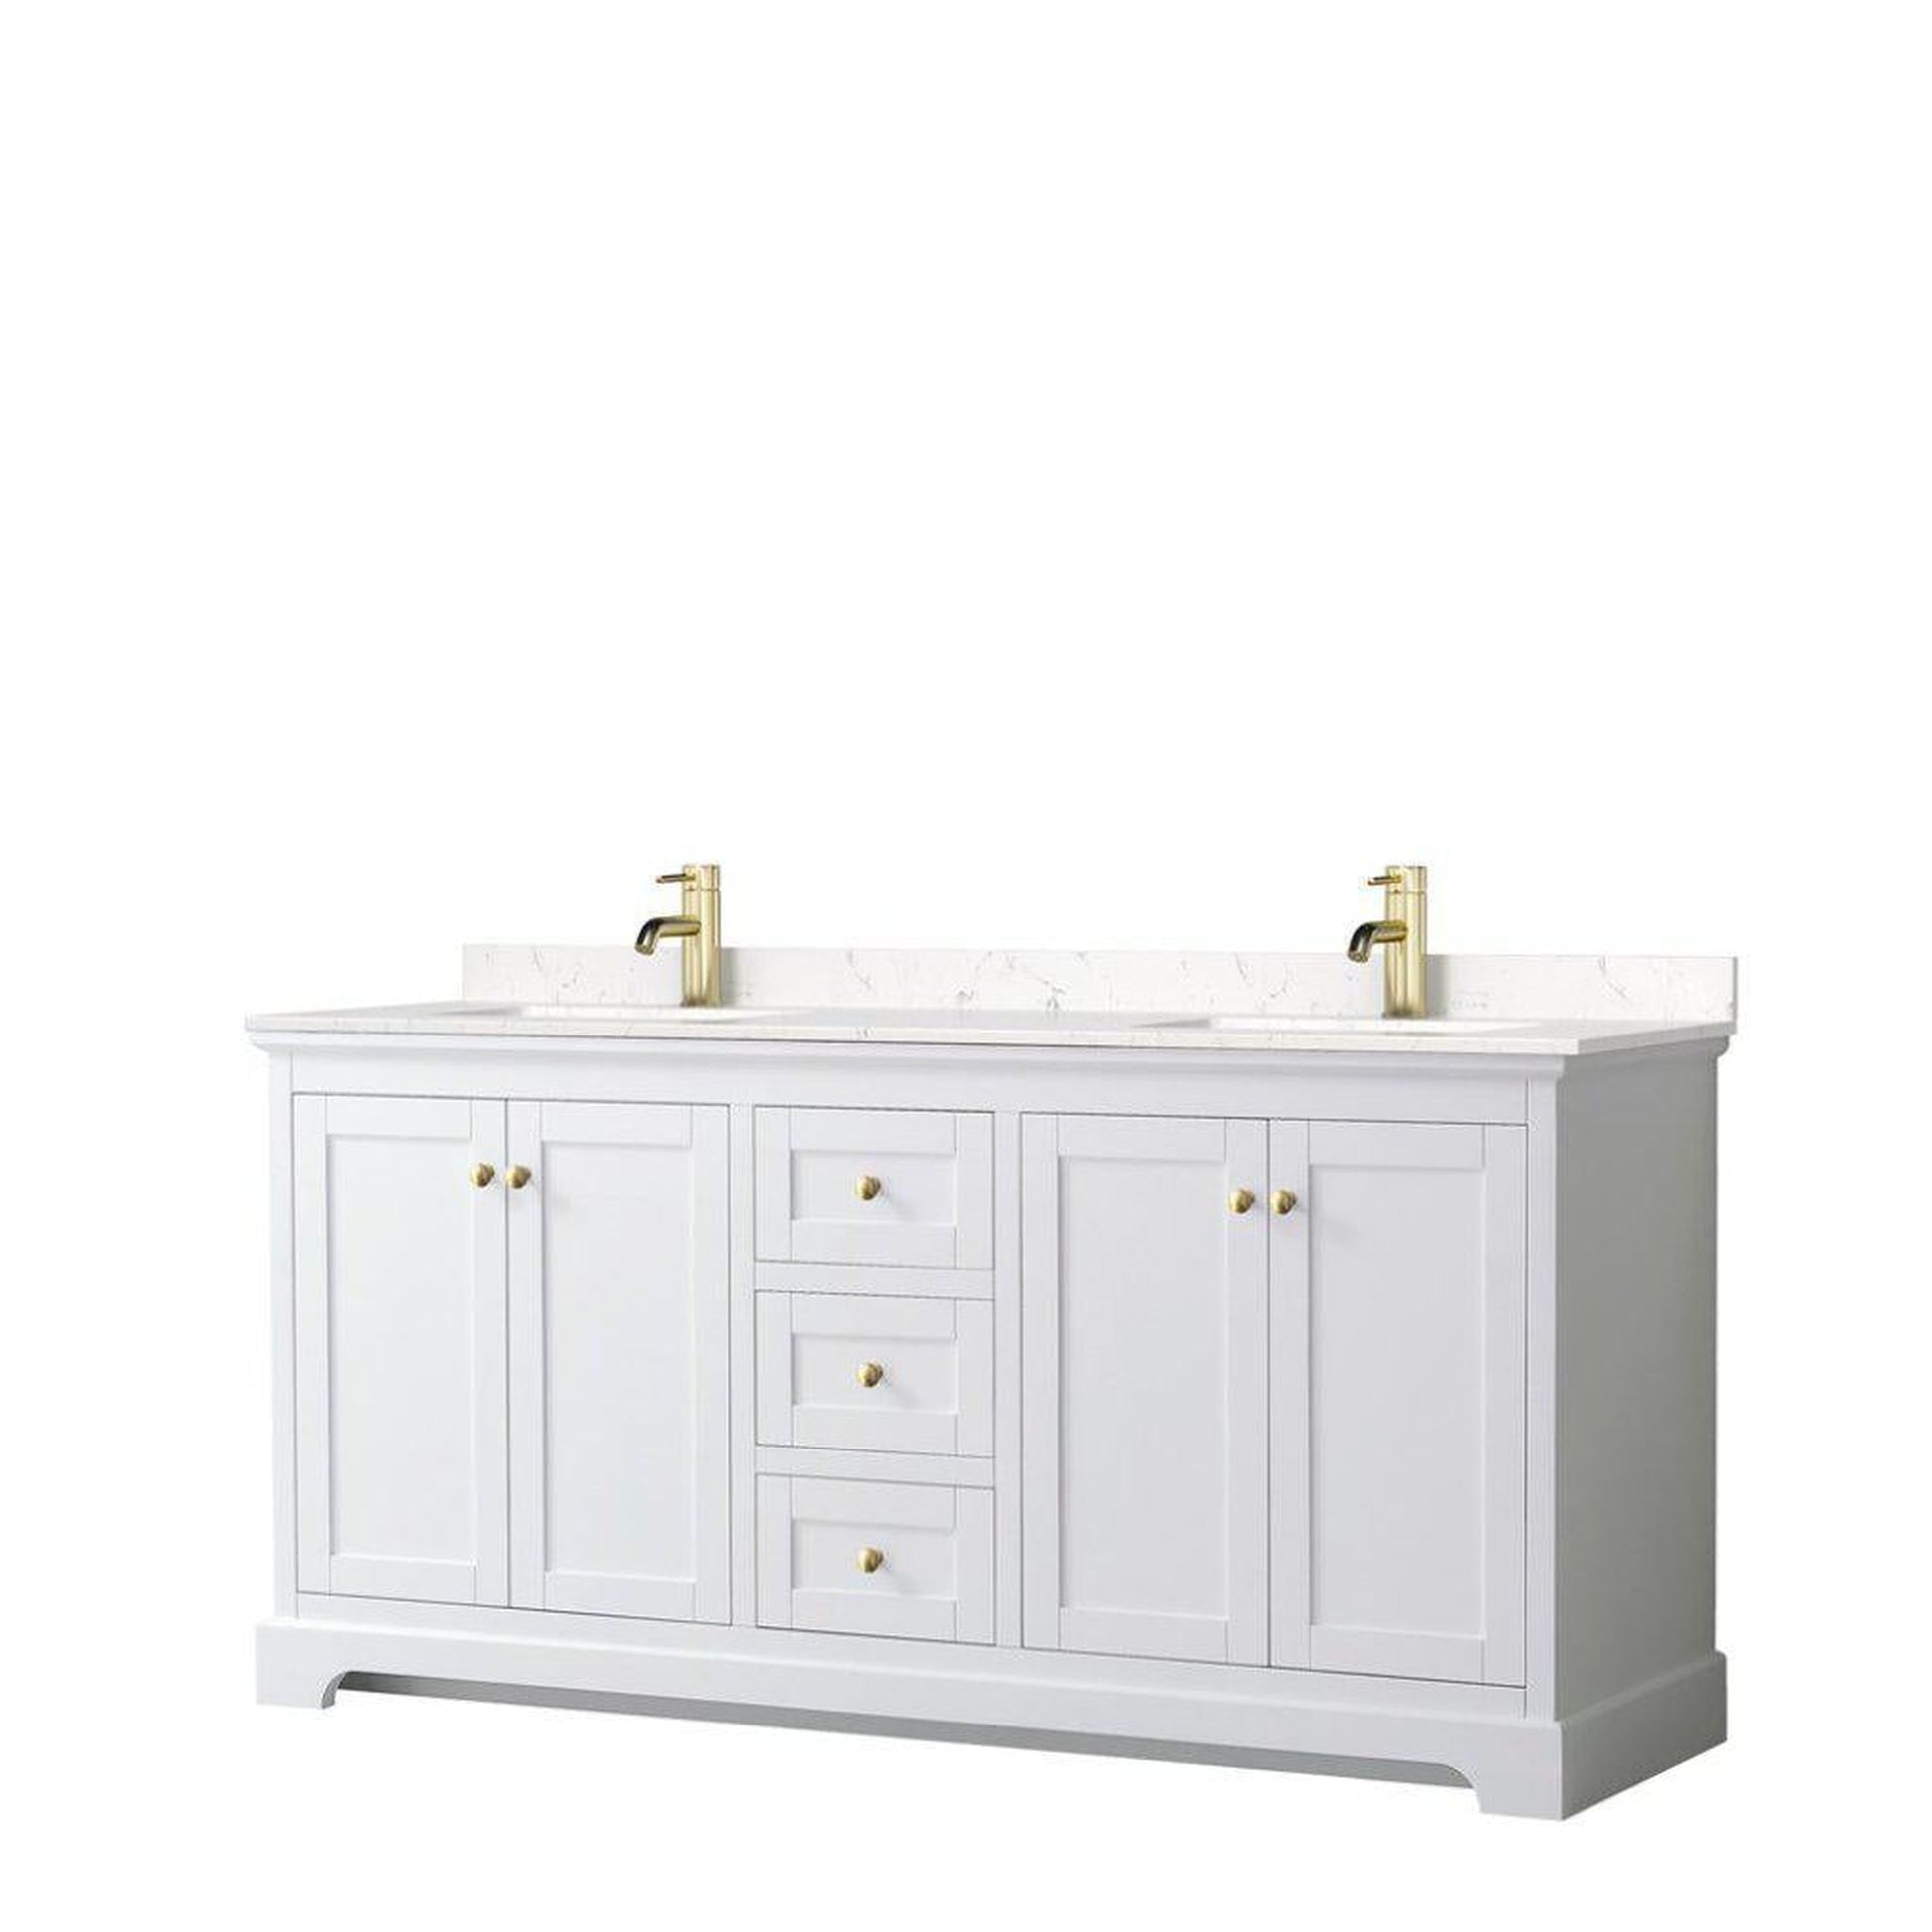 Wyndham Collection Avery 72" White Double Bathroom Vanity Set, Light-Vein Carrara Cultured Marble Countertop With 1-Hole Faucet, Square Sink, 70" Mirror, Gold Trims